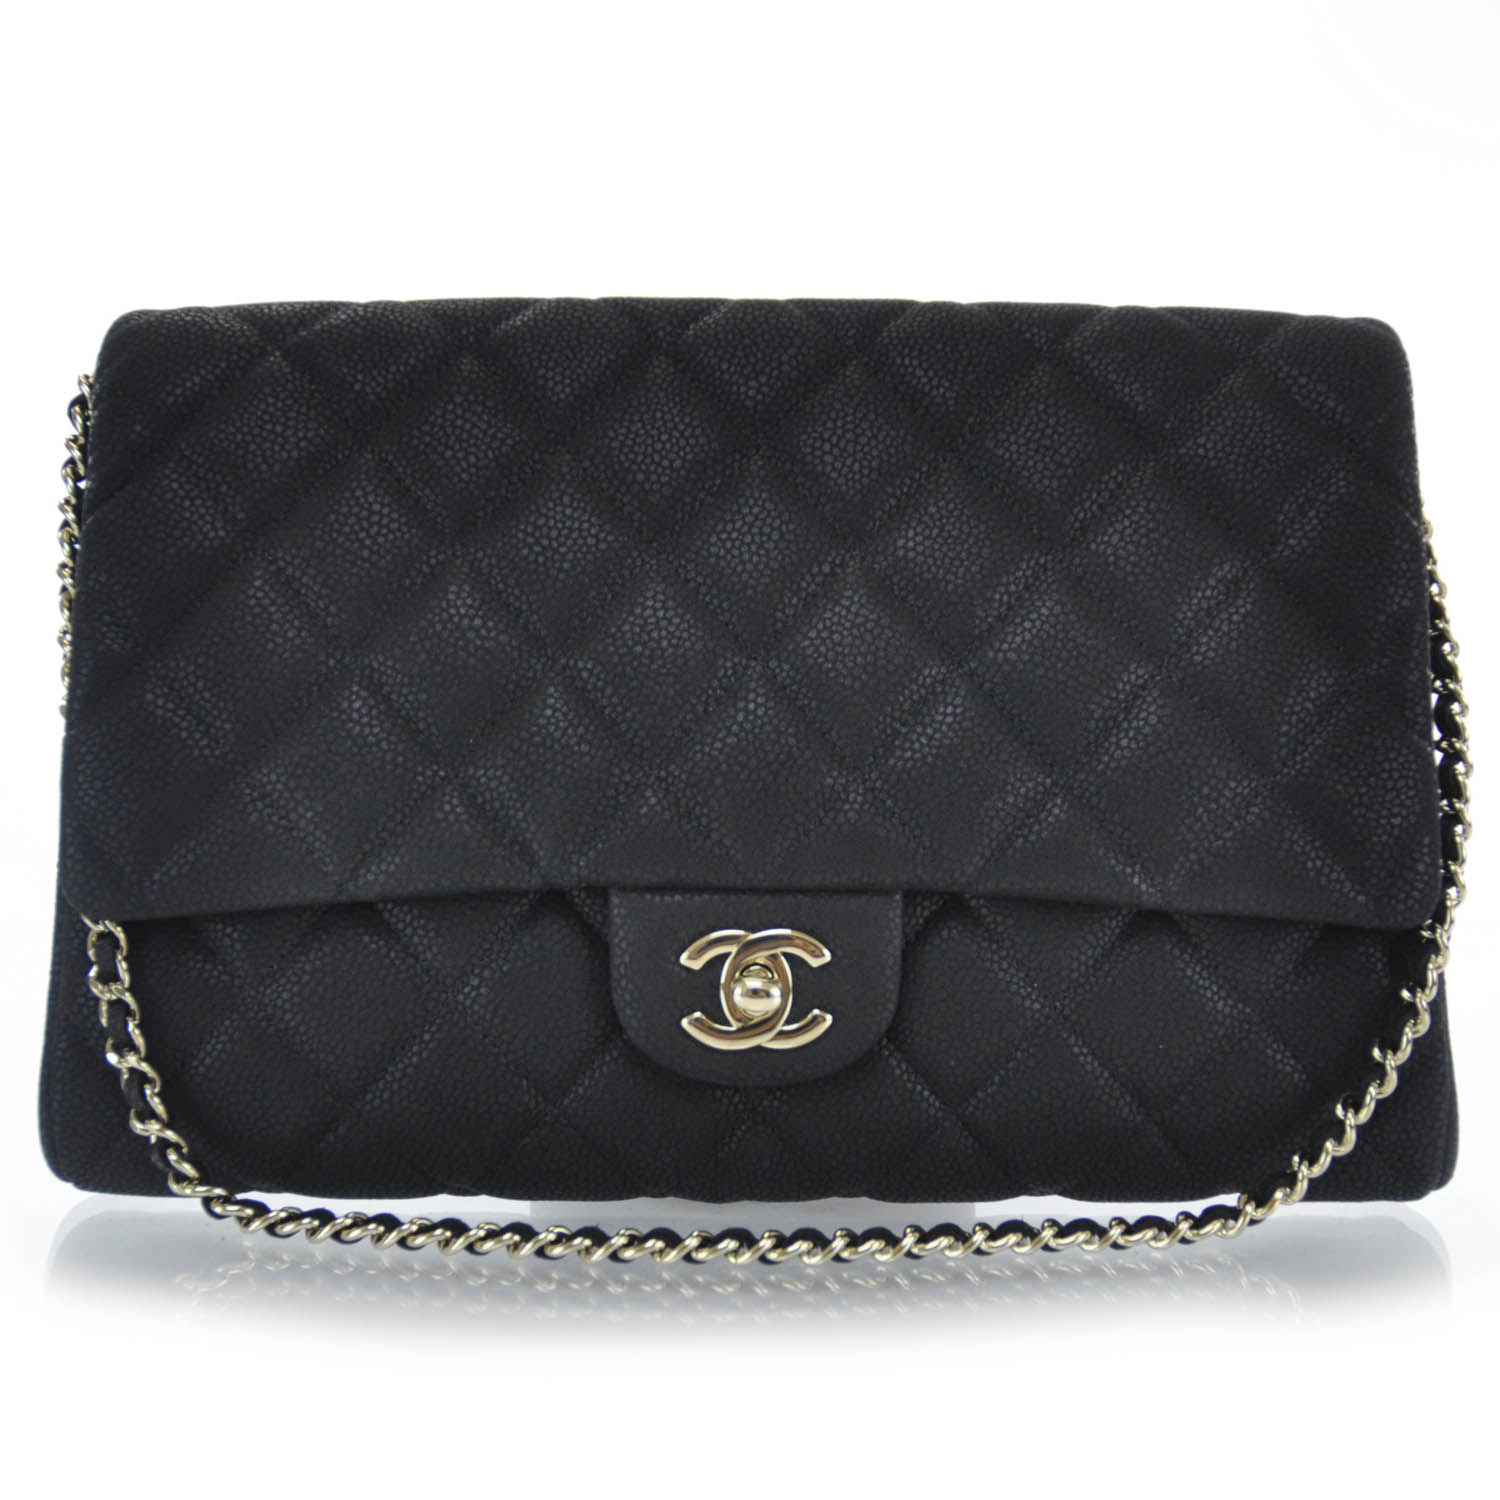 CHANEL Iridescent Caviar Quilted Clutch Flap Black 31811